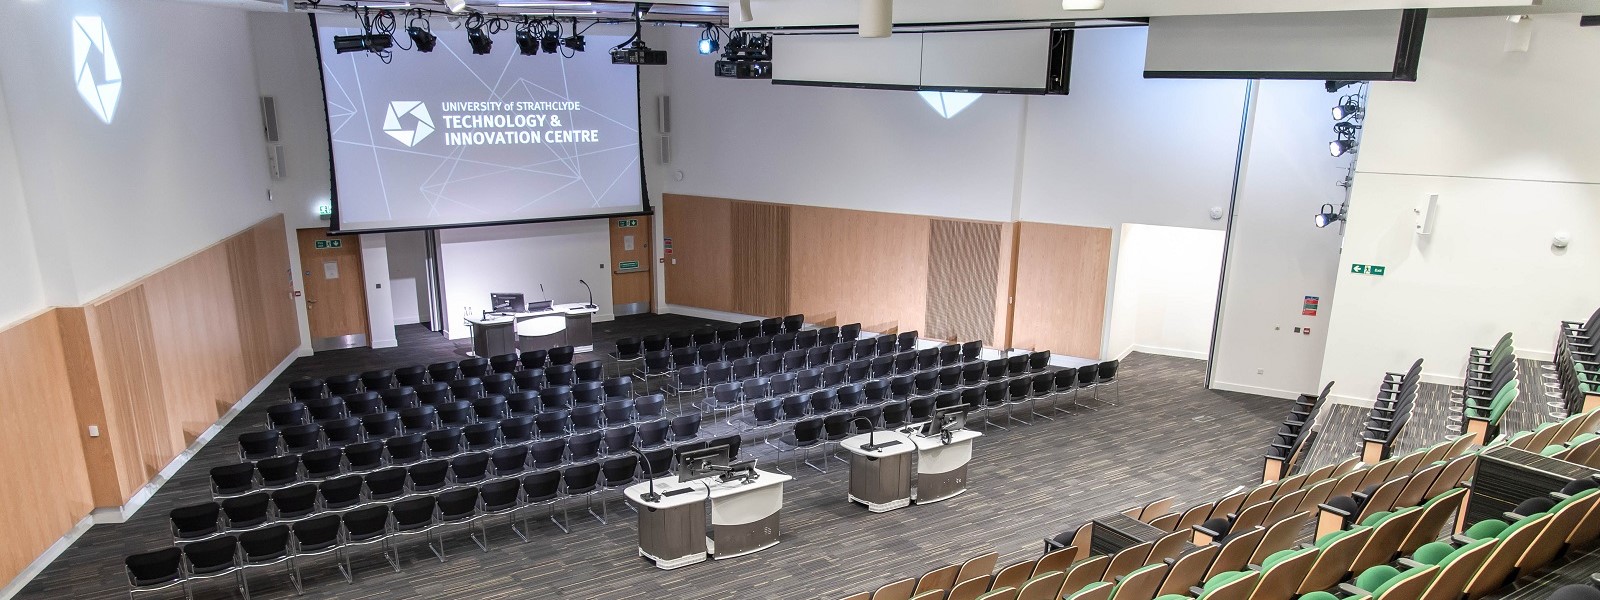 Main auditorium in Technology and Innovation Centre, view from rear.  Photo: Lucy Knott